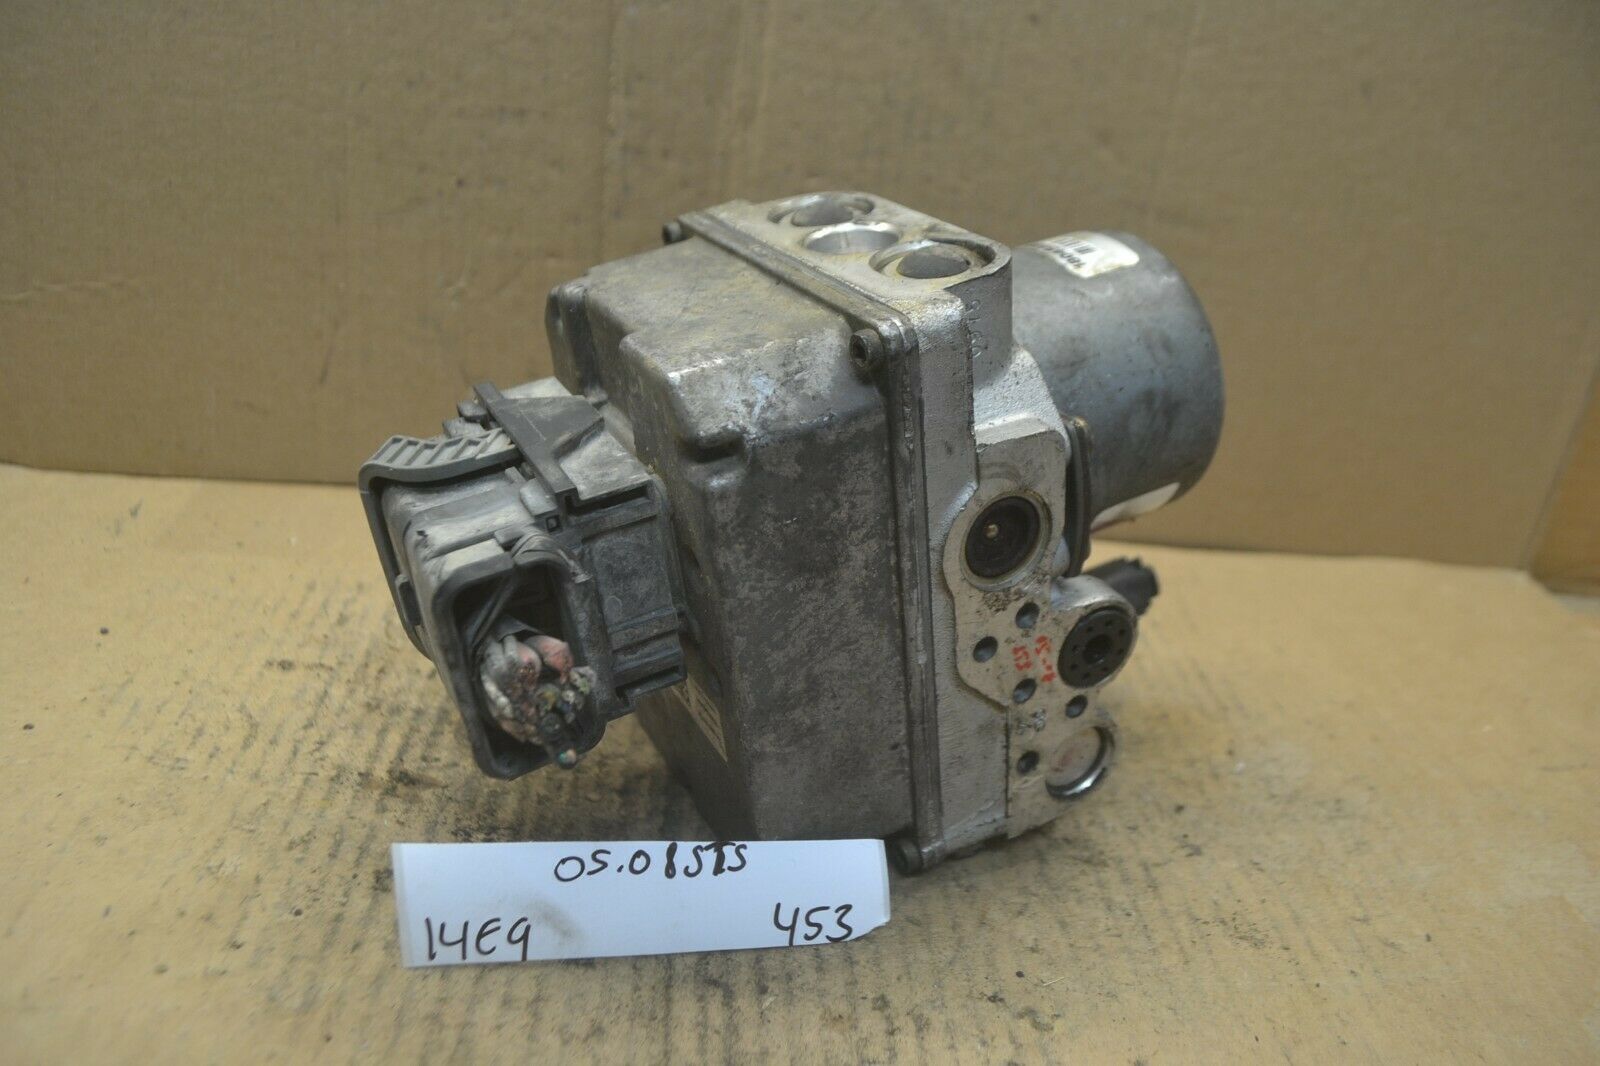 Primary image for 2005-2008 Cadillac STS ABS Pump Control OEM 15253226 Module 453-14e9